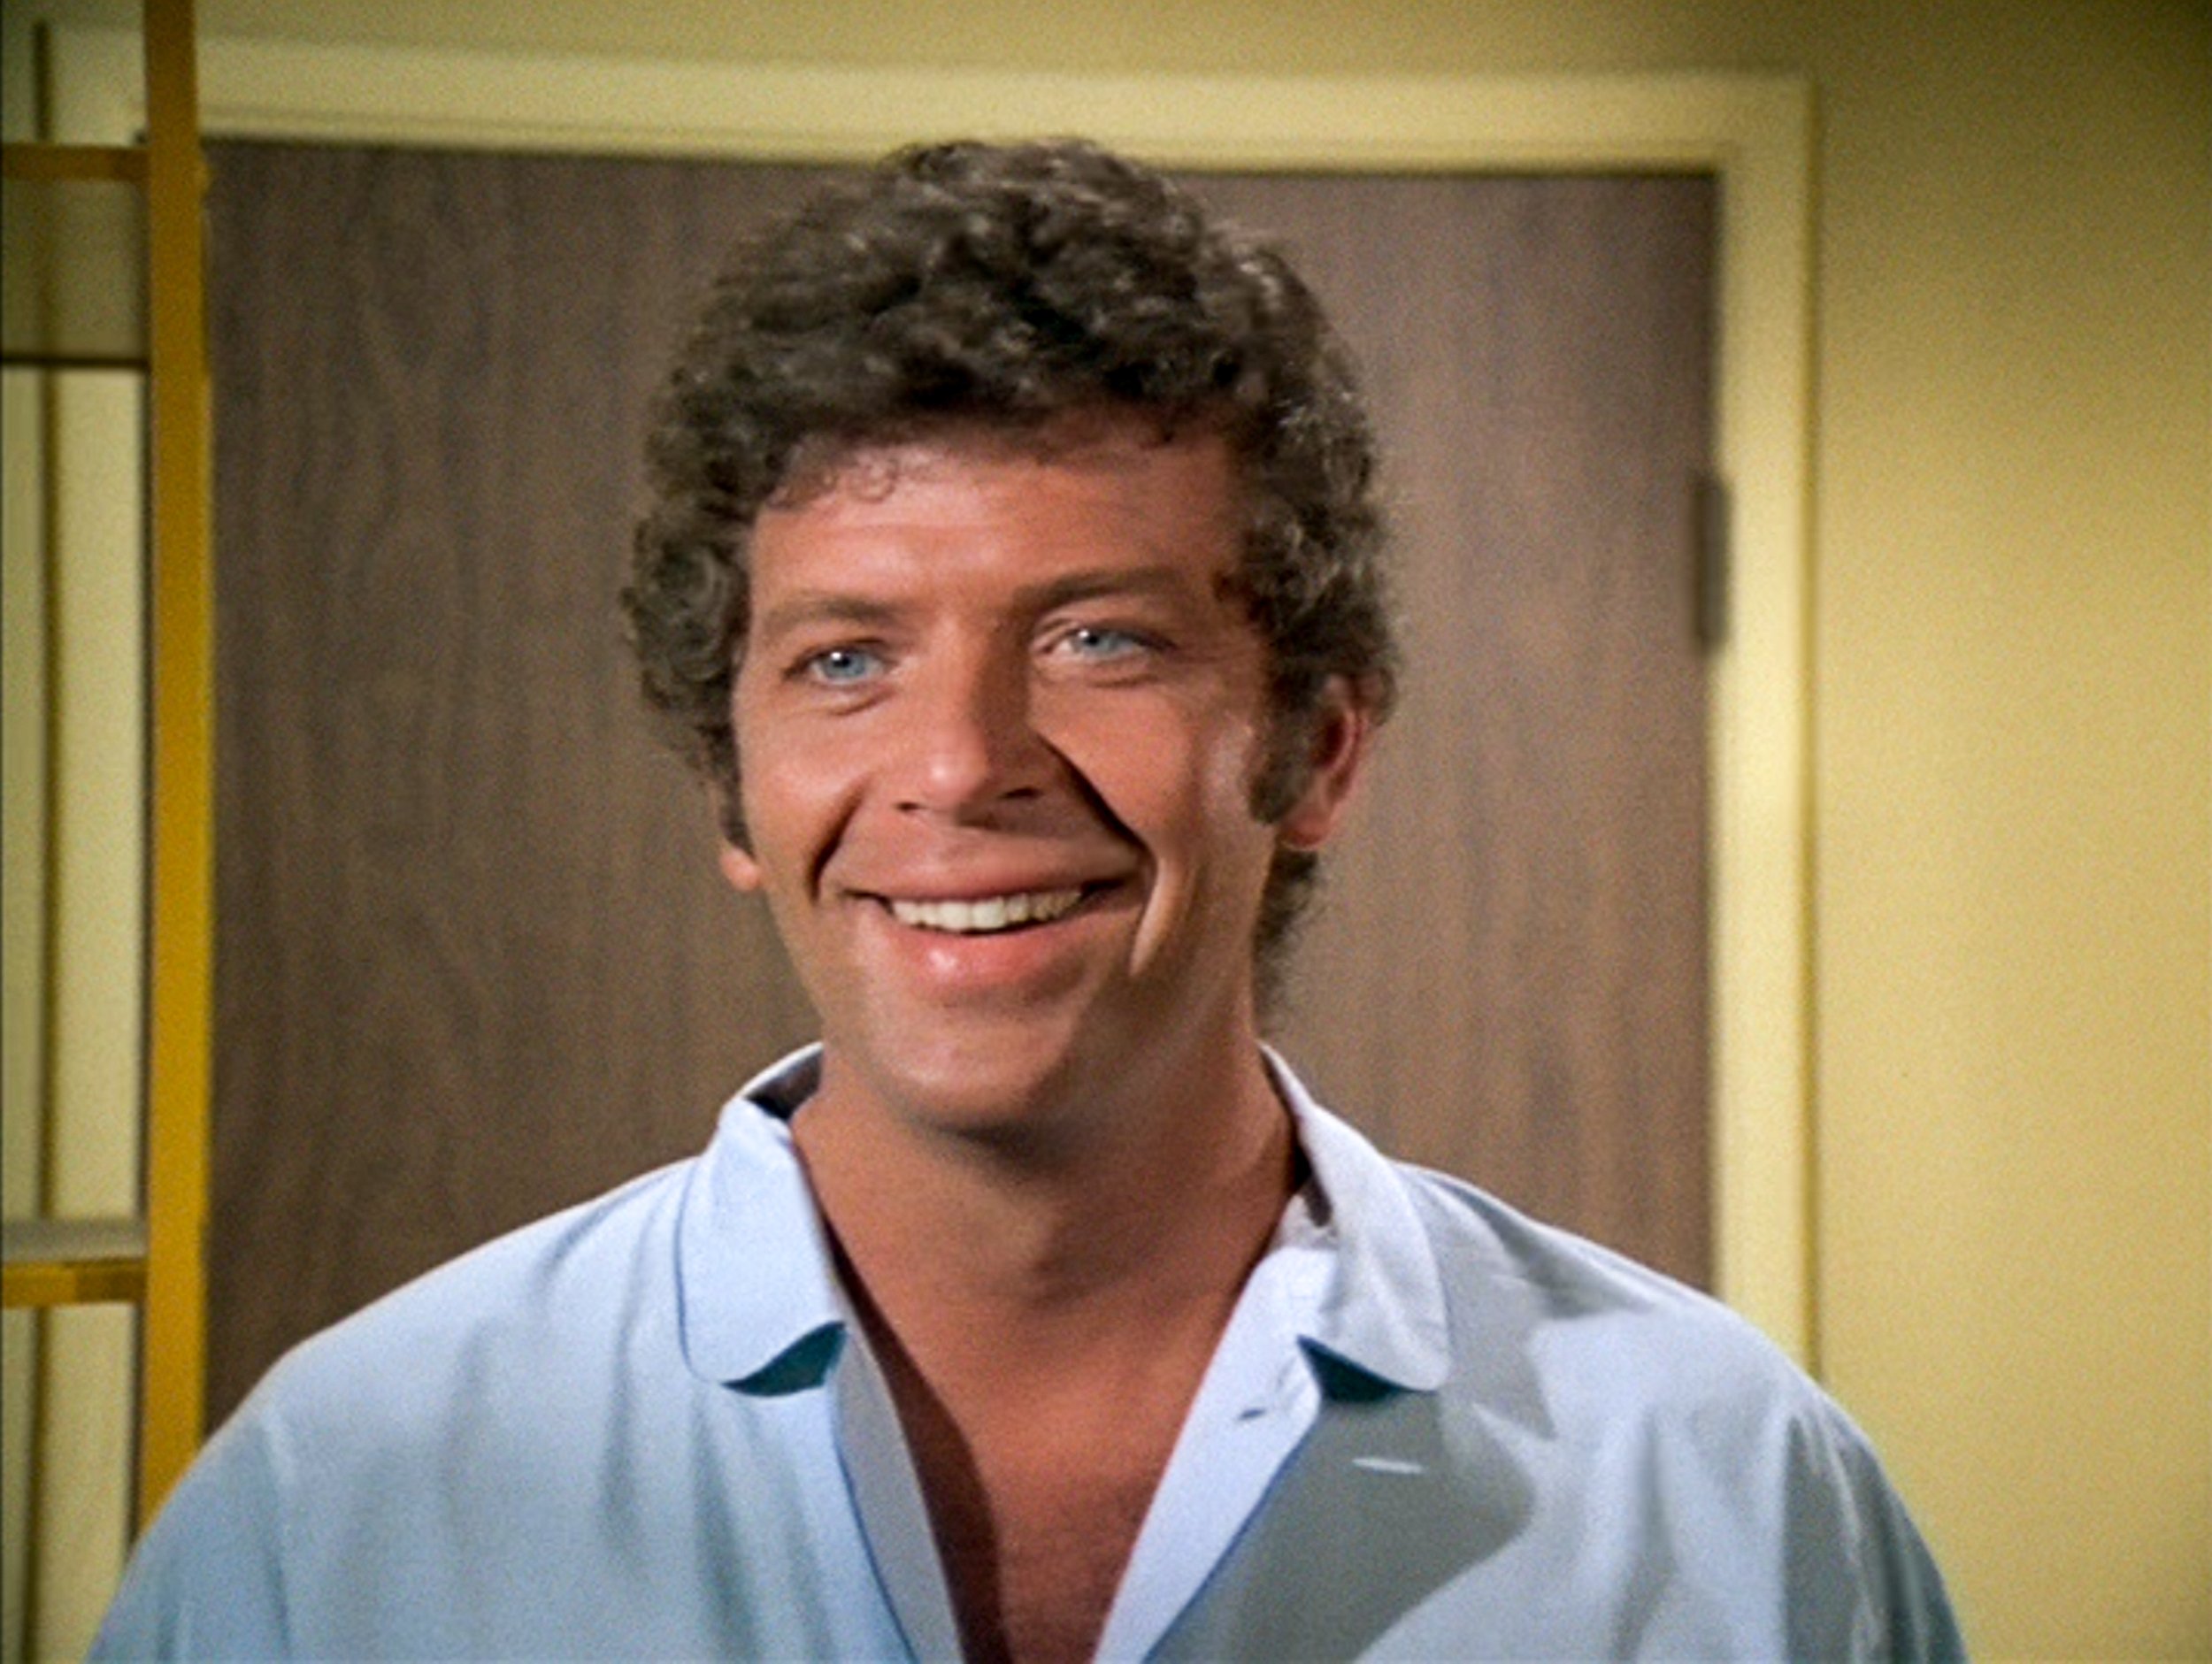 Robert Reed as Mike Brady in THE BRADY BUNCH episode, "Pass The Tabu." Original air date September 29, 1972. Image is a screen grab.| Source: Getty Images